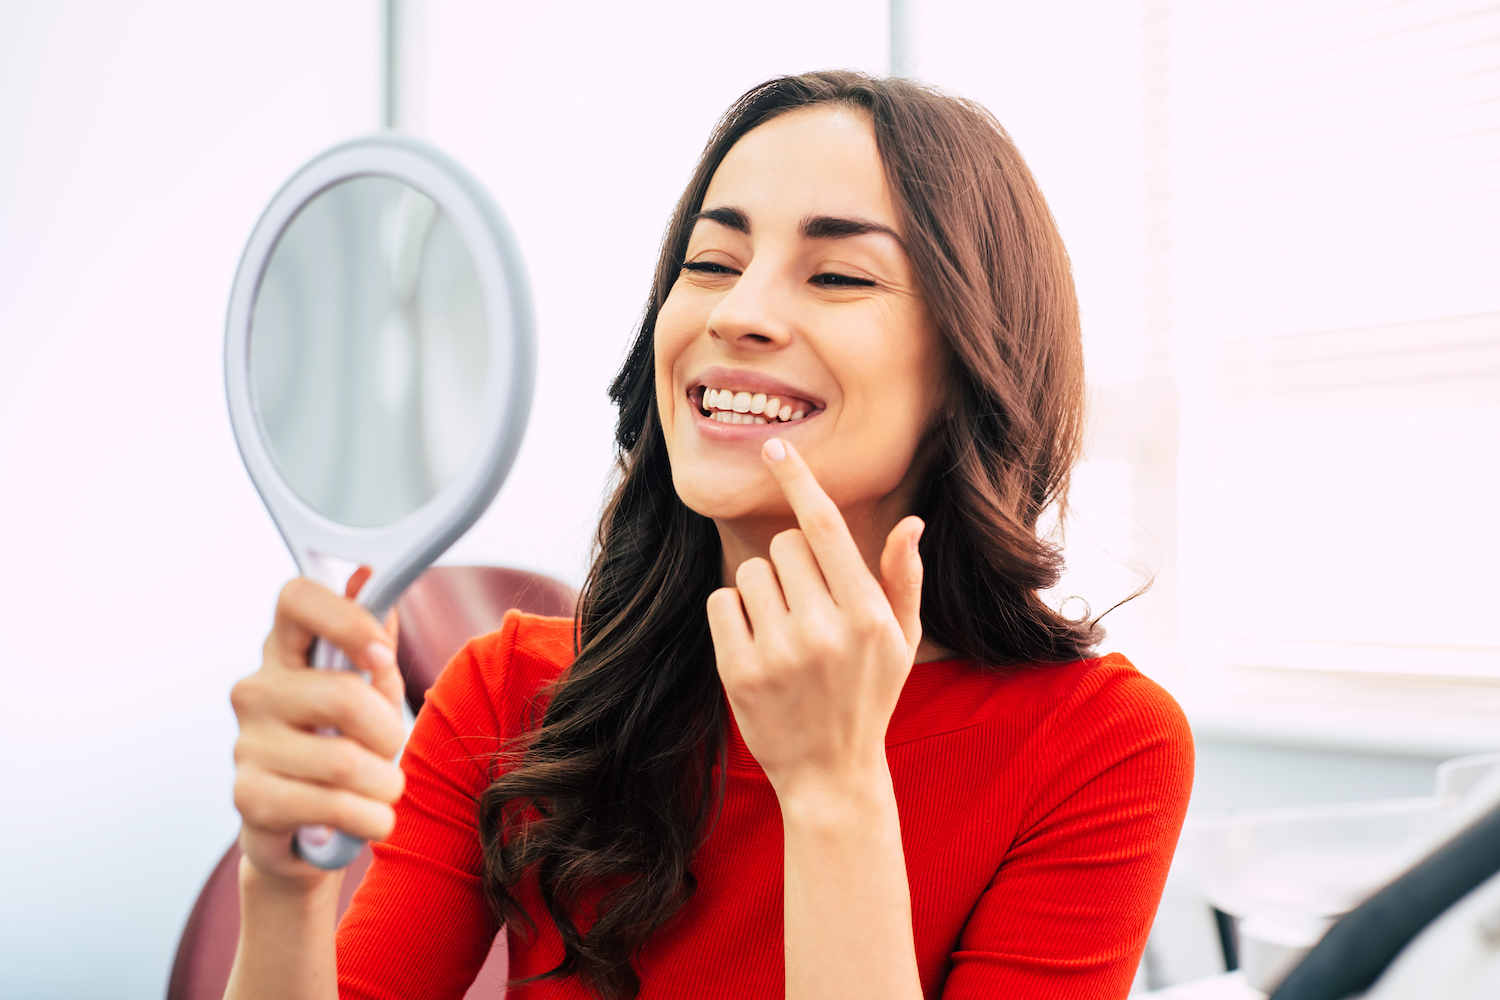 Smiling woman with long curly hair in the dental chair is using a mirror to see the result of dental work